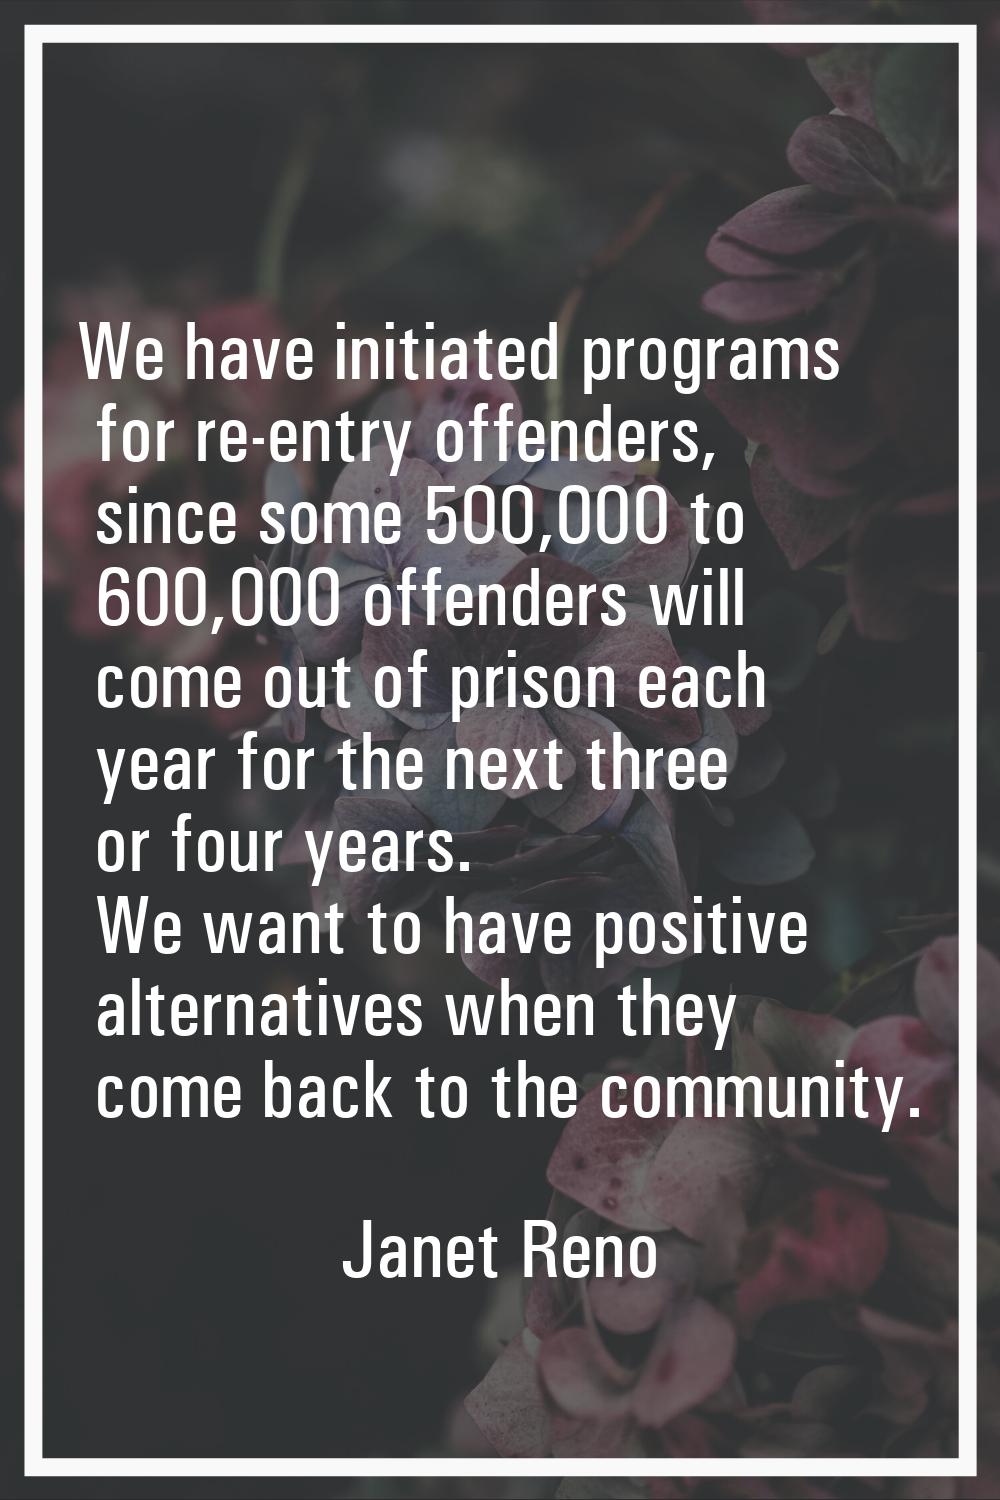 We have initiated programs for re-entry offenders, since some 500,000 to 600,000 offenders will com